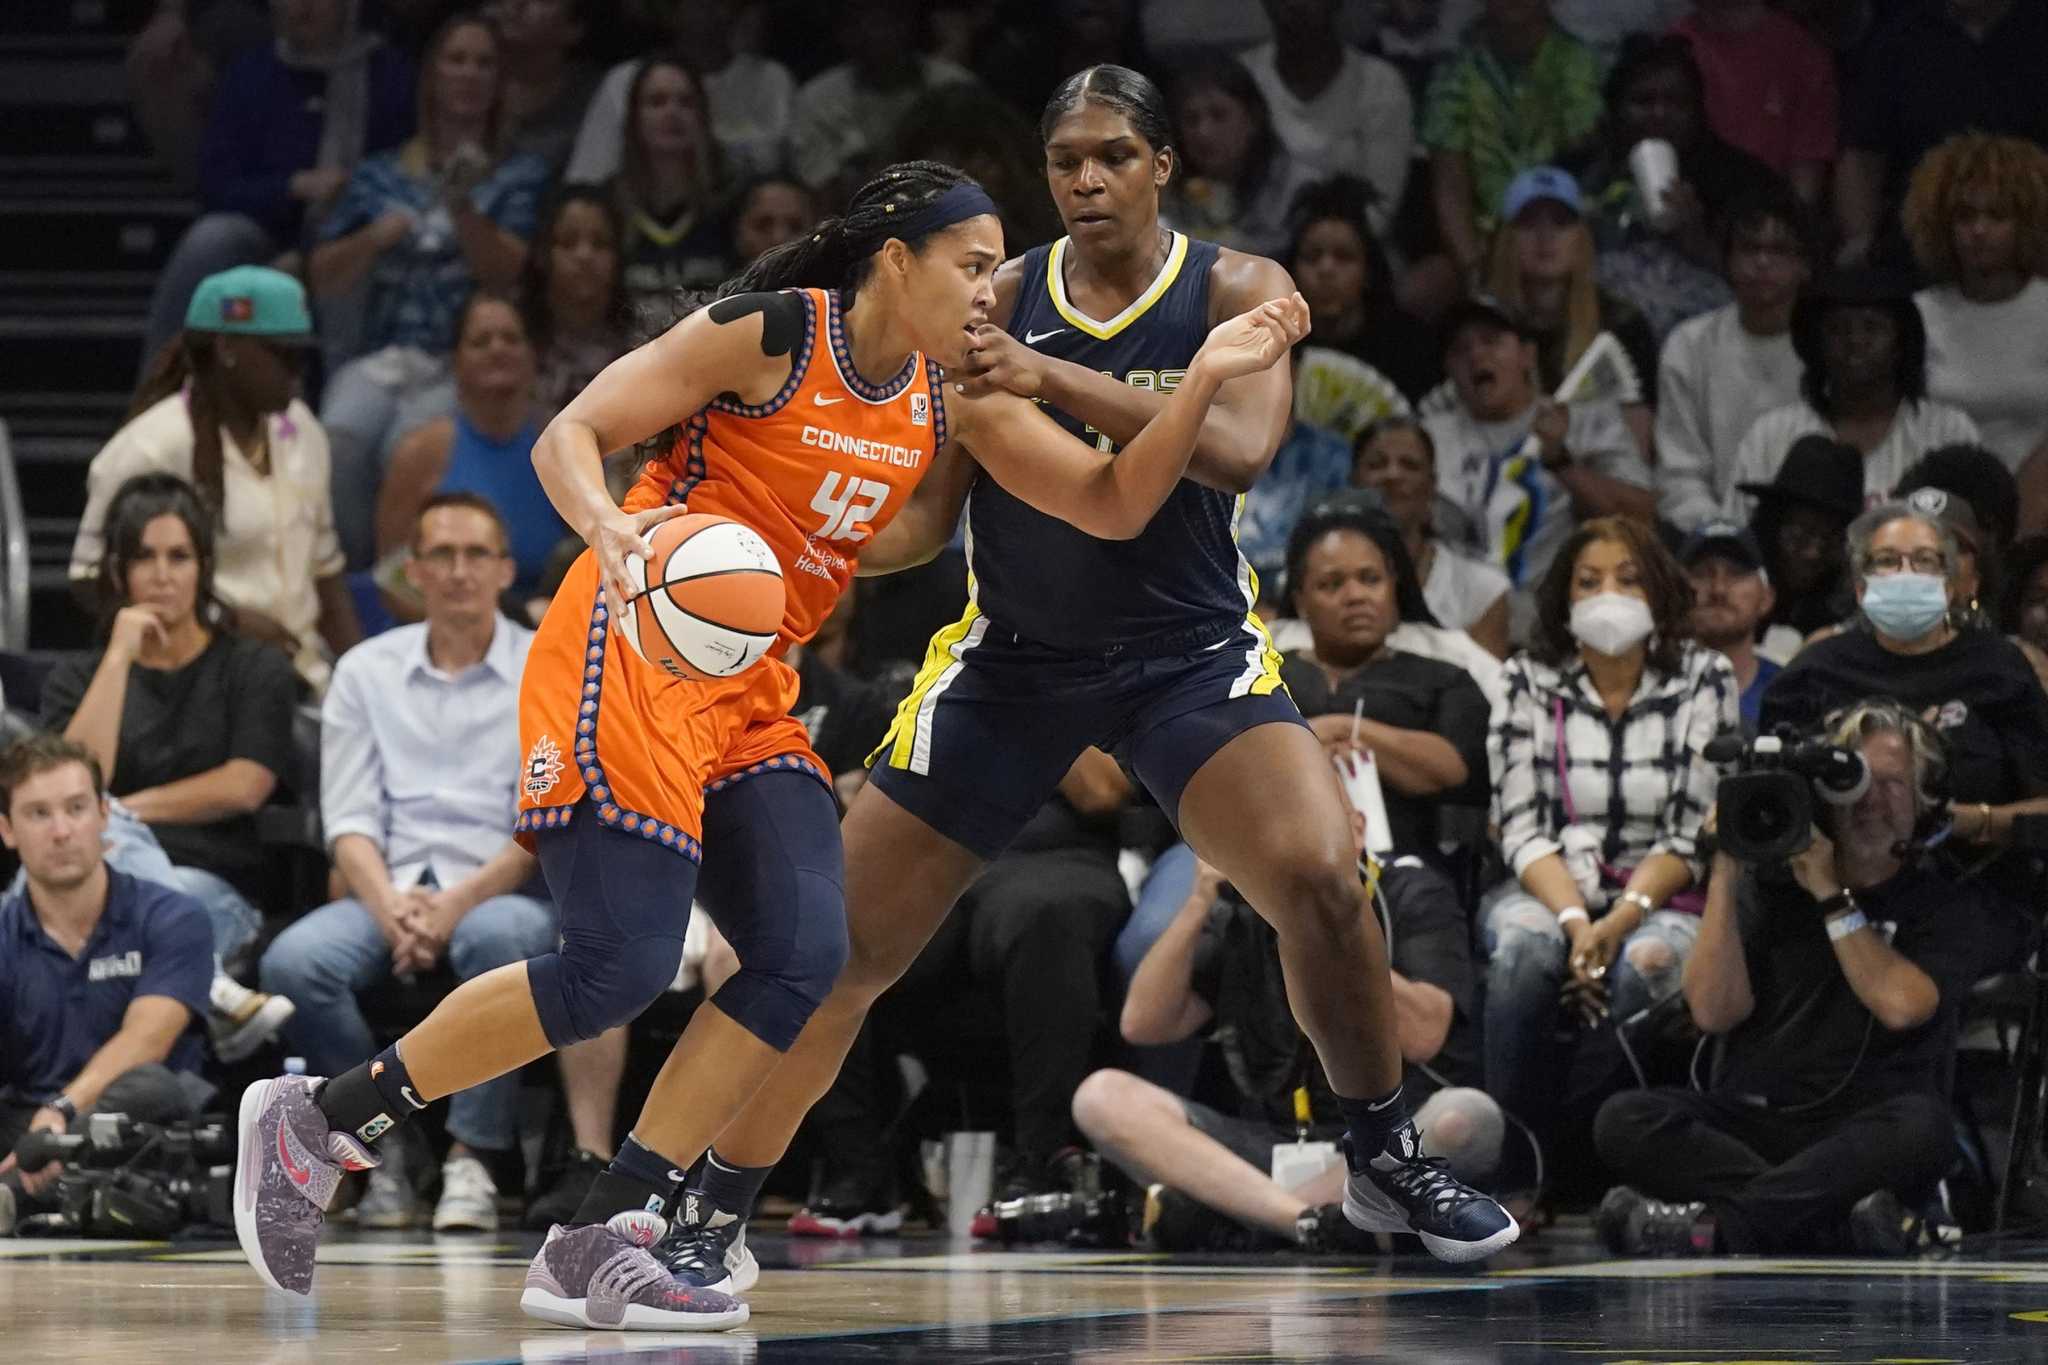 Jones won last year’s WNBA Most Improved Player before being named the leag...